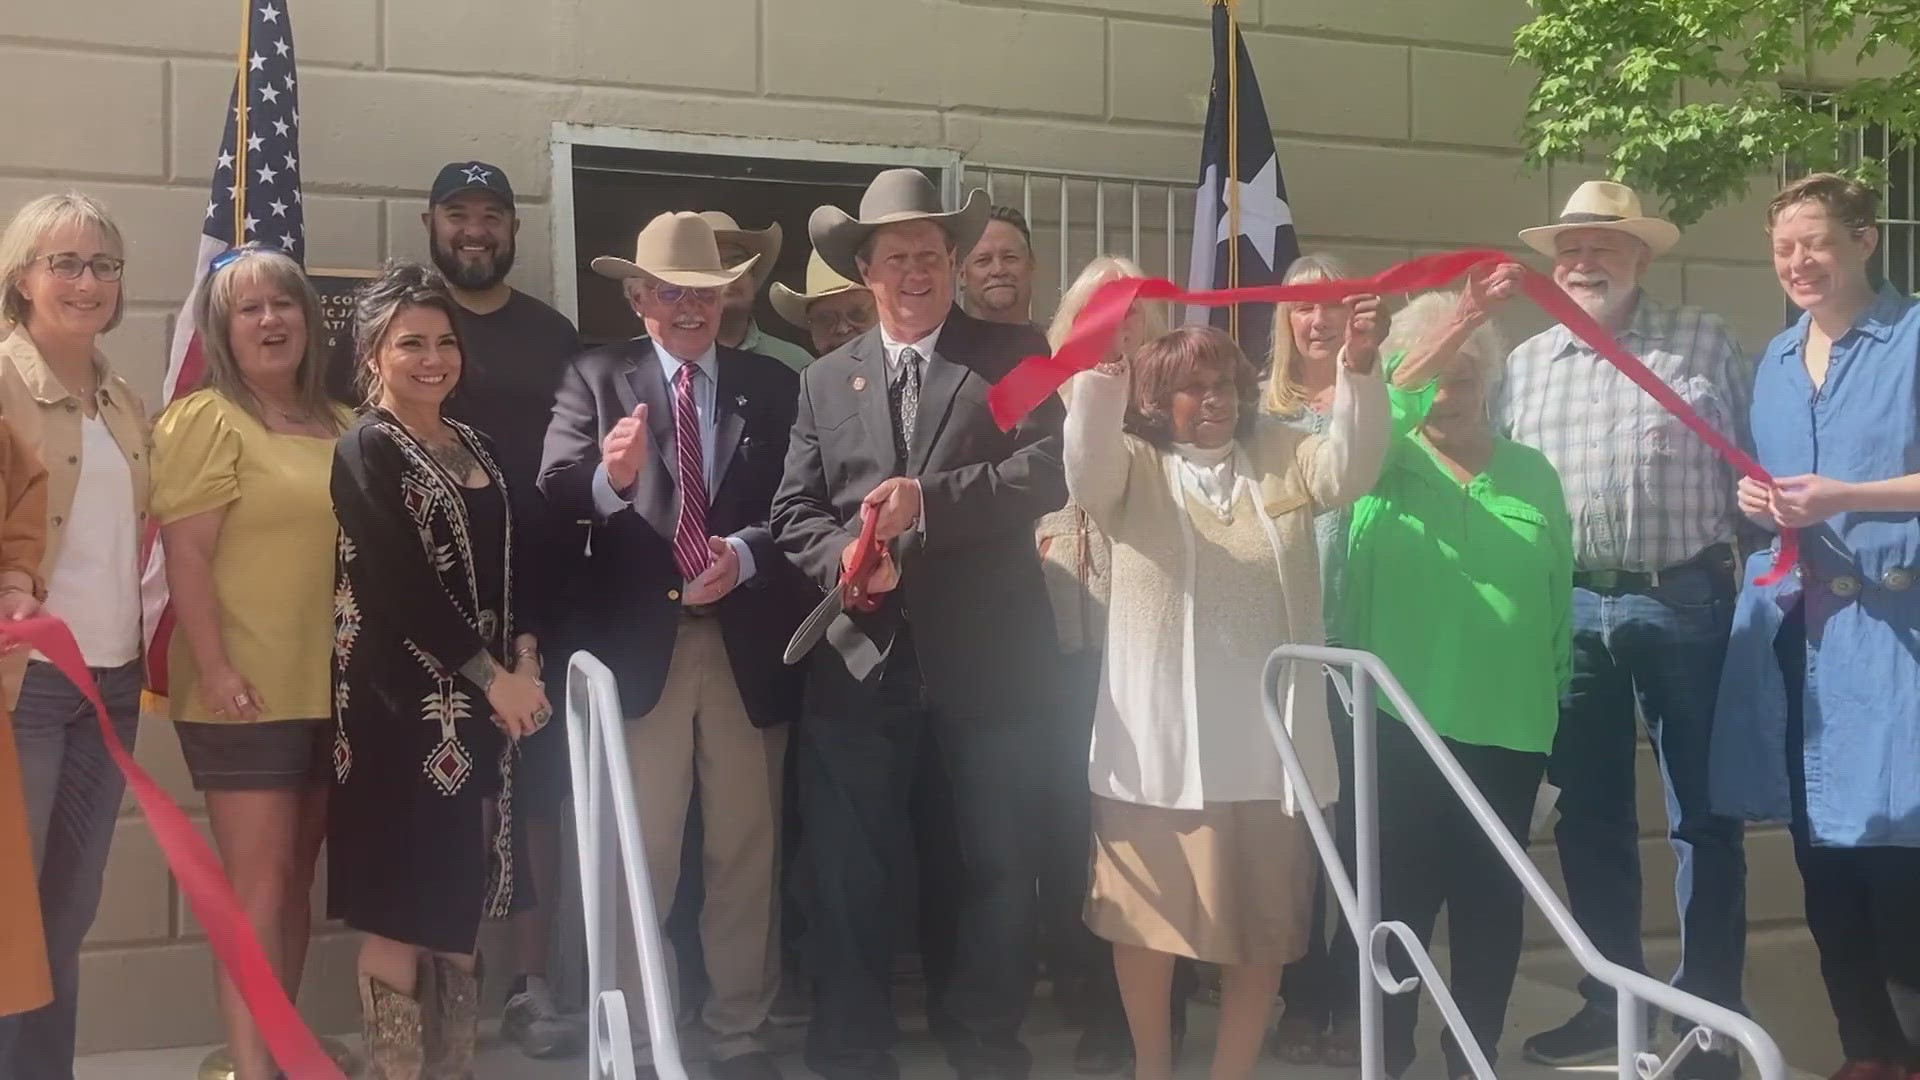 On Saturday morning, a crowd of people gathered at the Jeff Davis County Jail to applaud a ribbon cutting that commemorated the soft opening of a new museum.